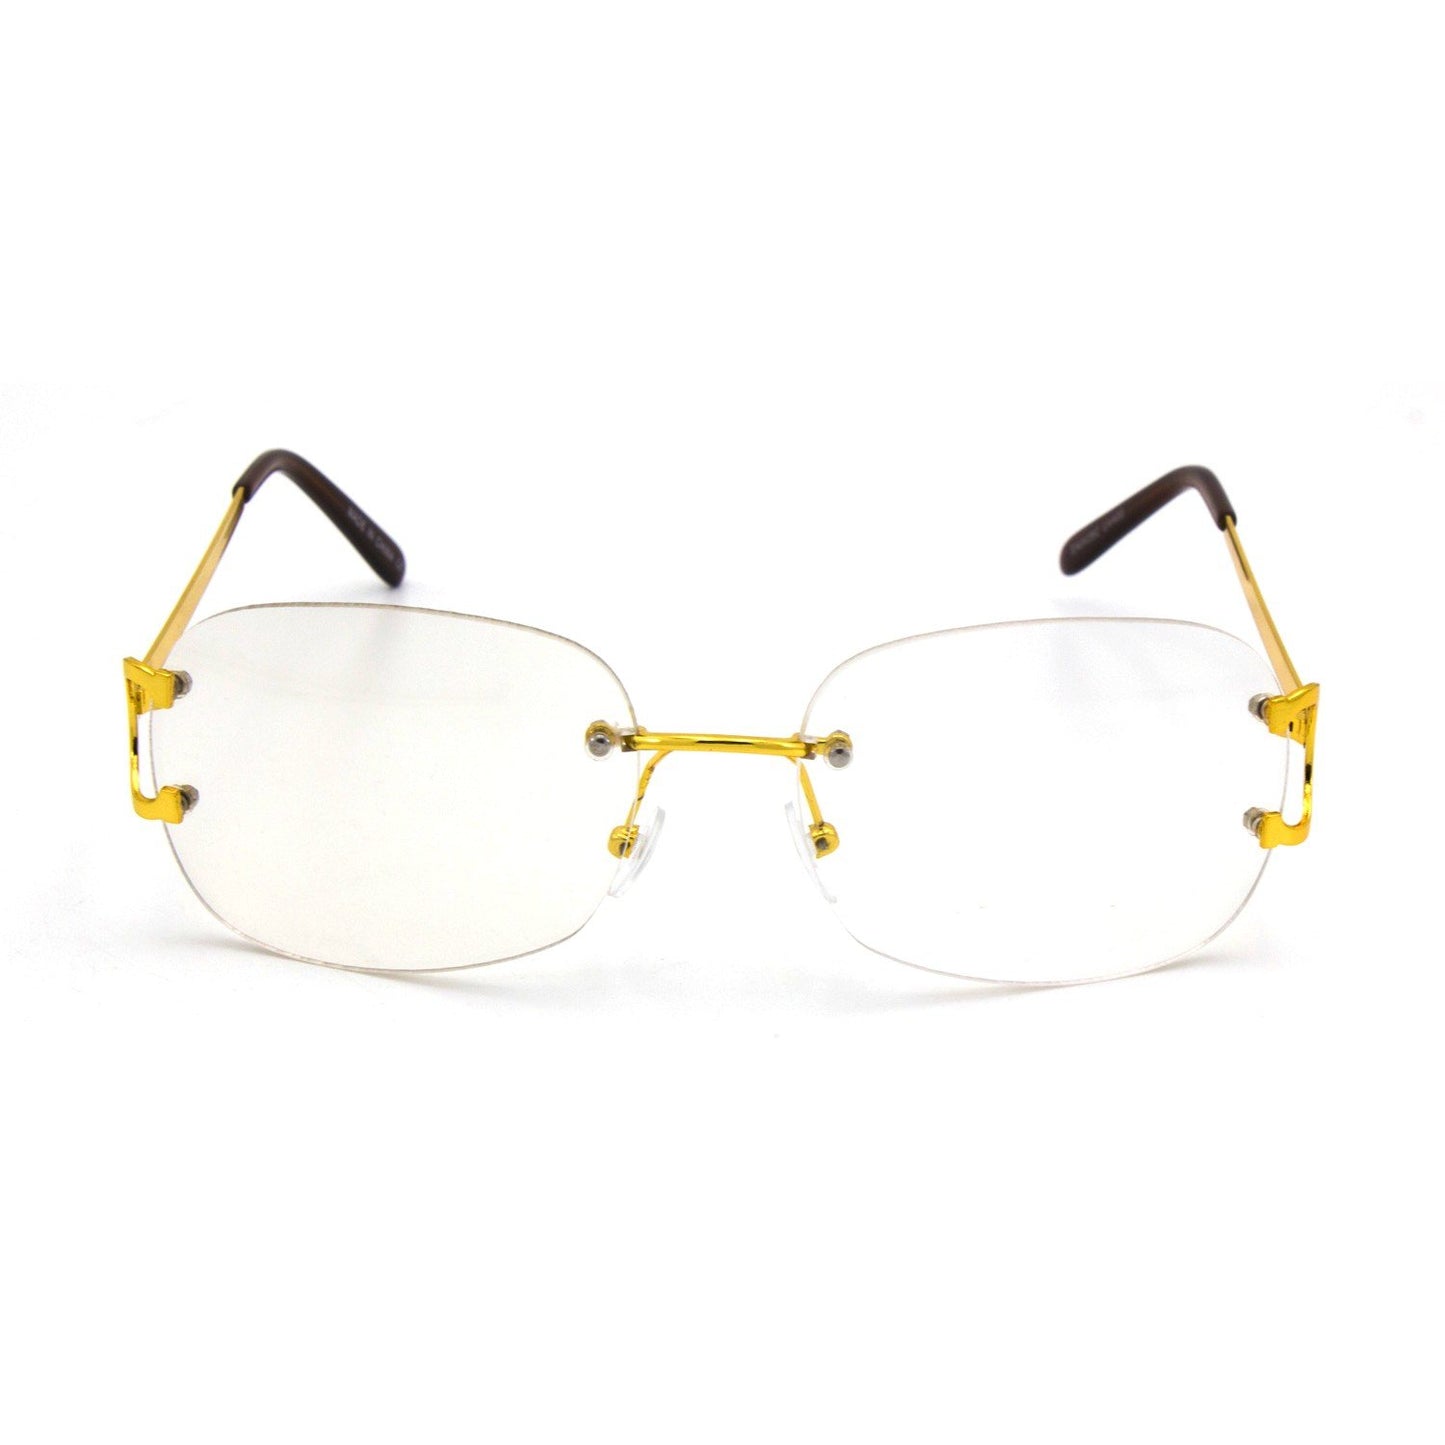 "Mansions" Rimless Clear Frames - Weekend Shade Sunglasses